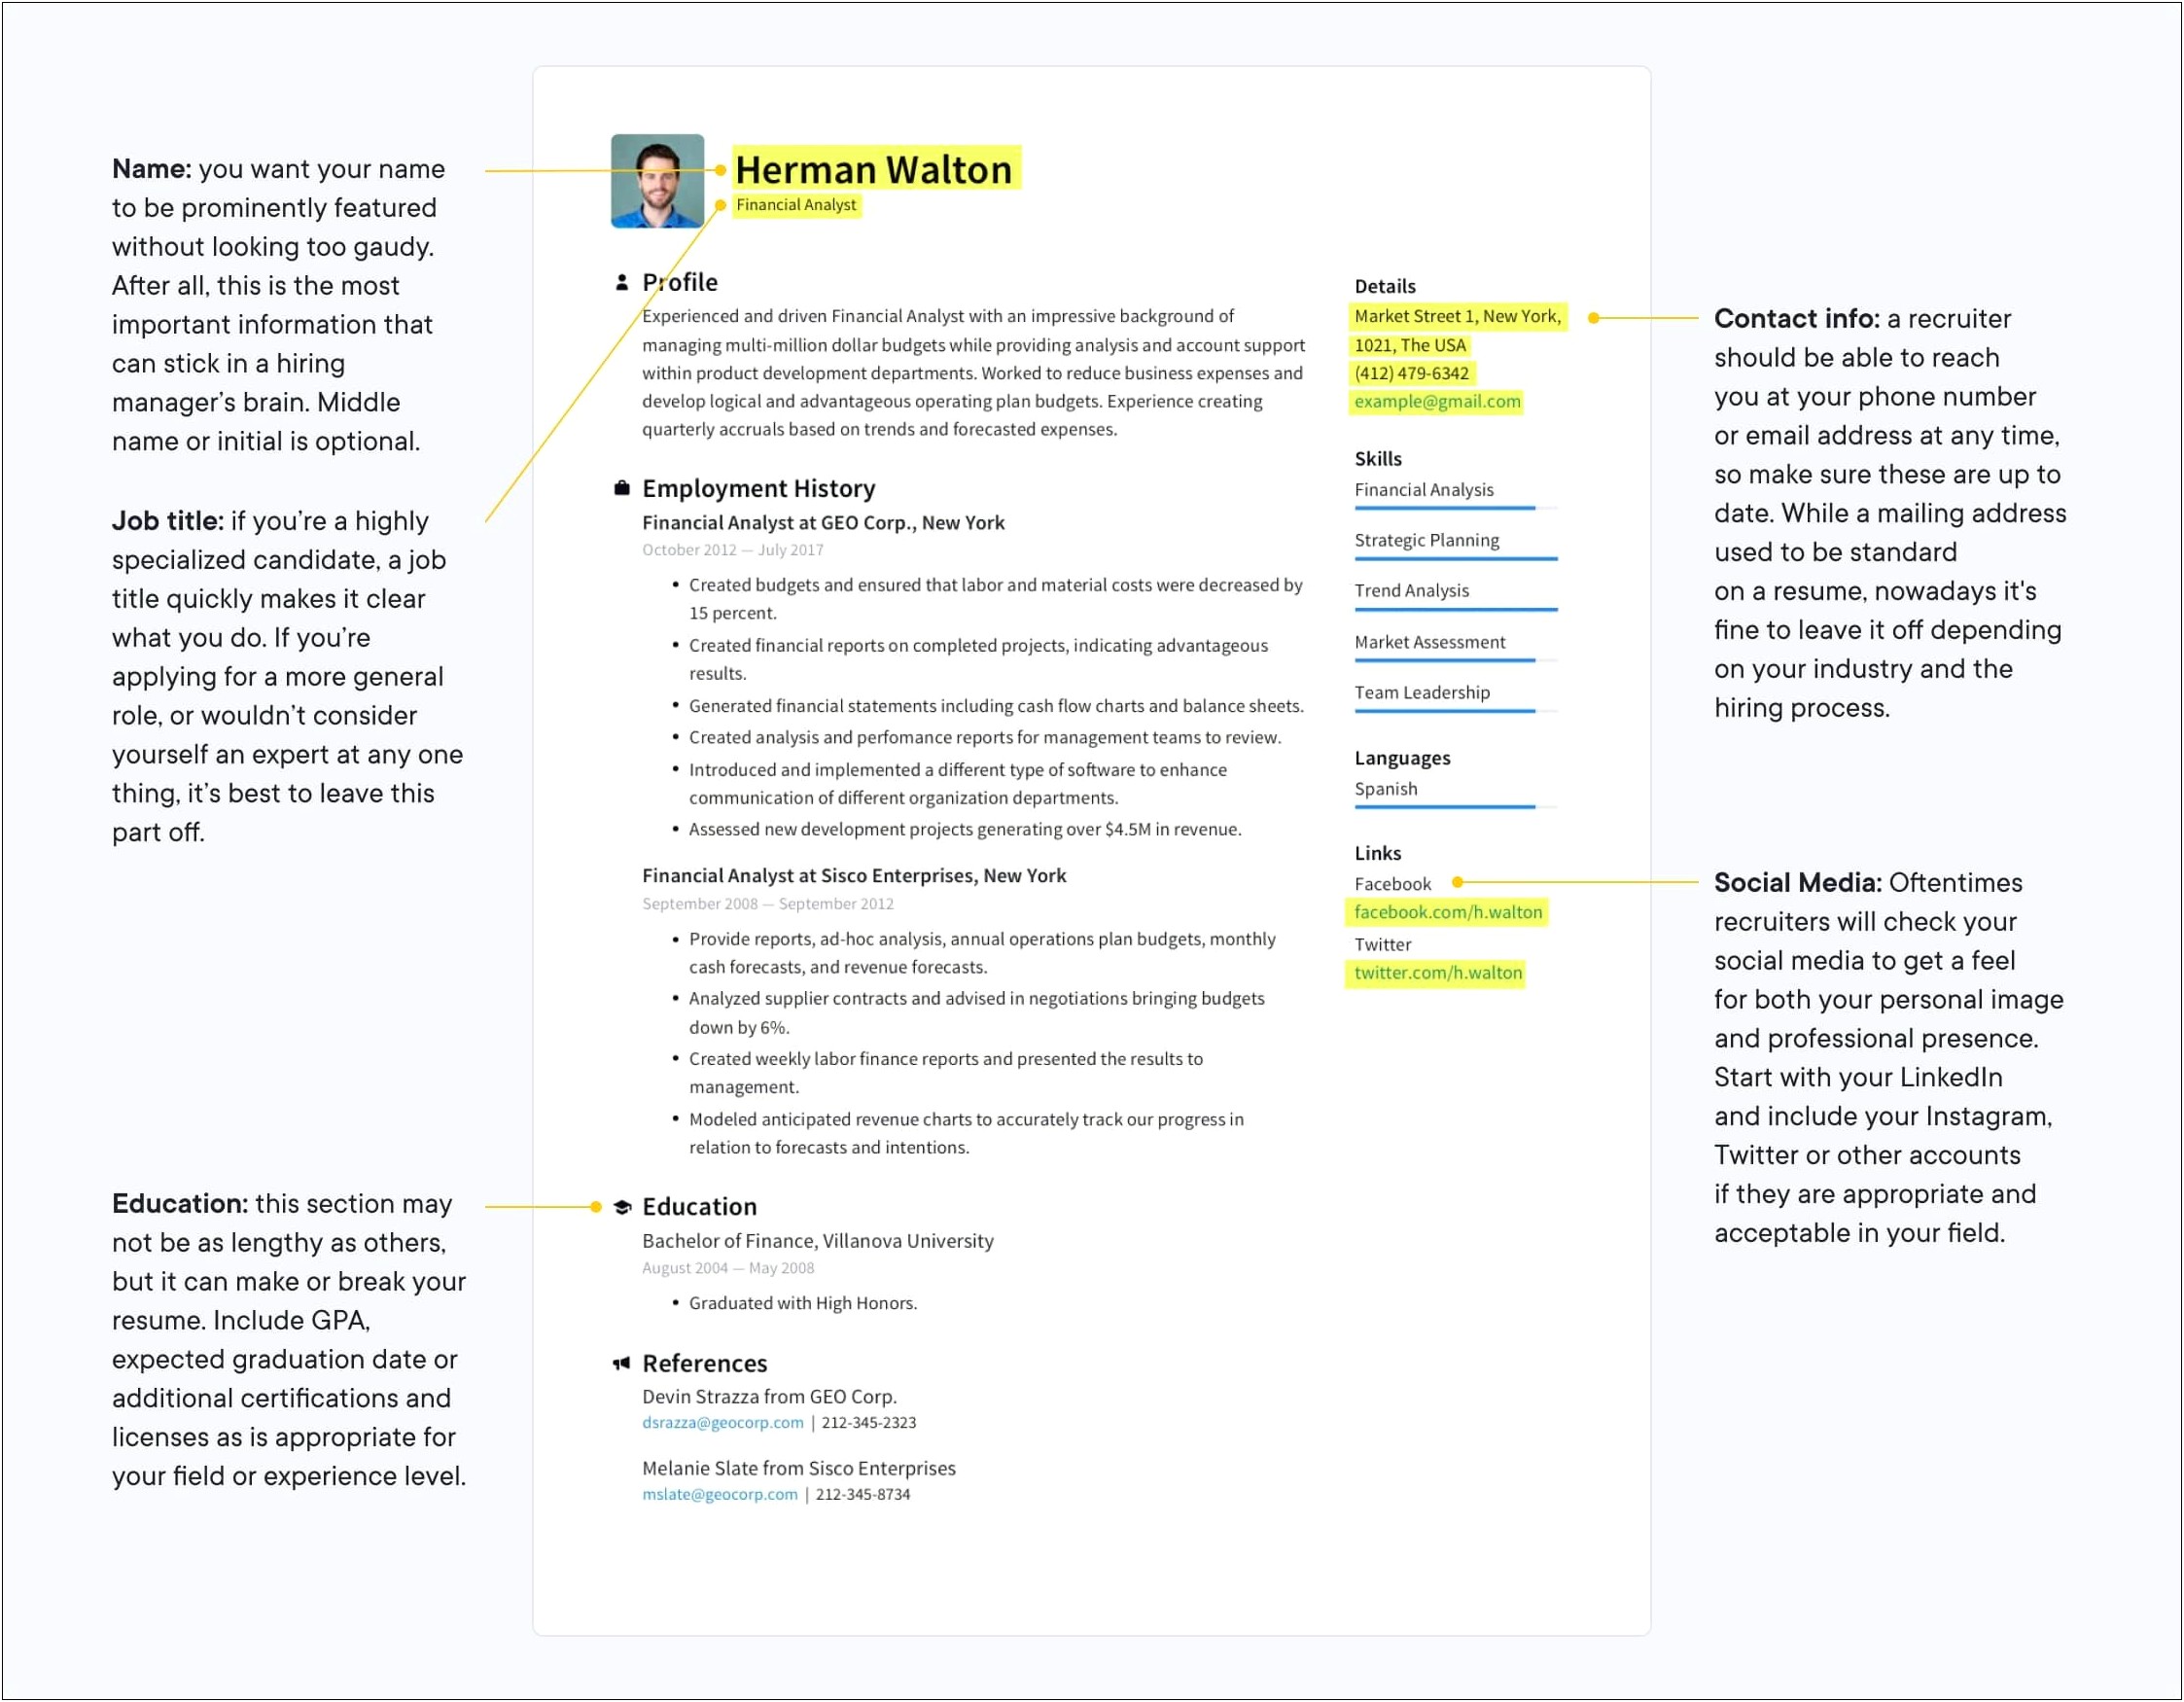 Resume Sample Love To Connect People Make Deals